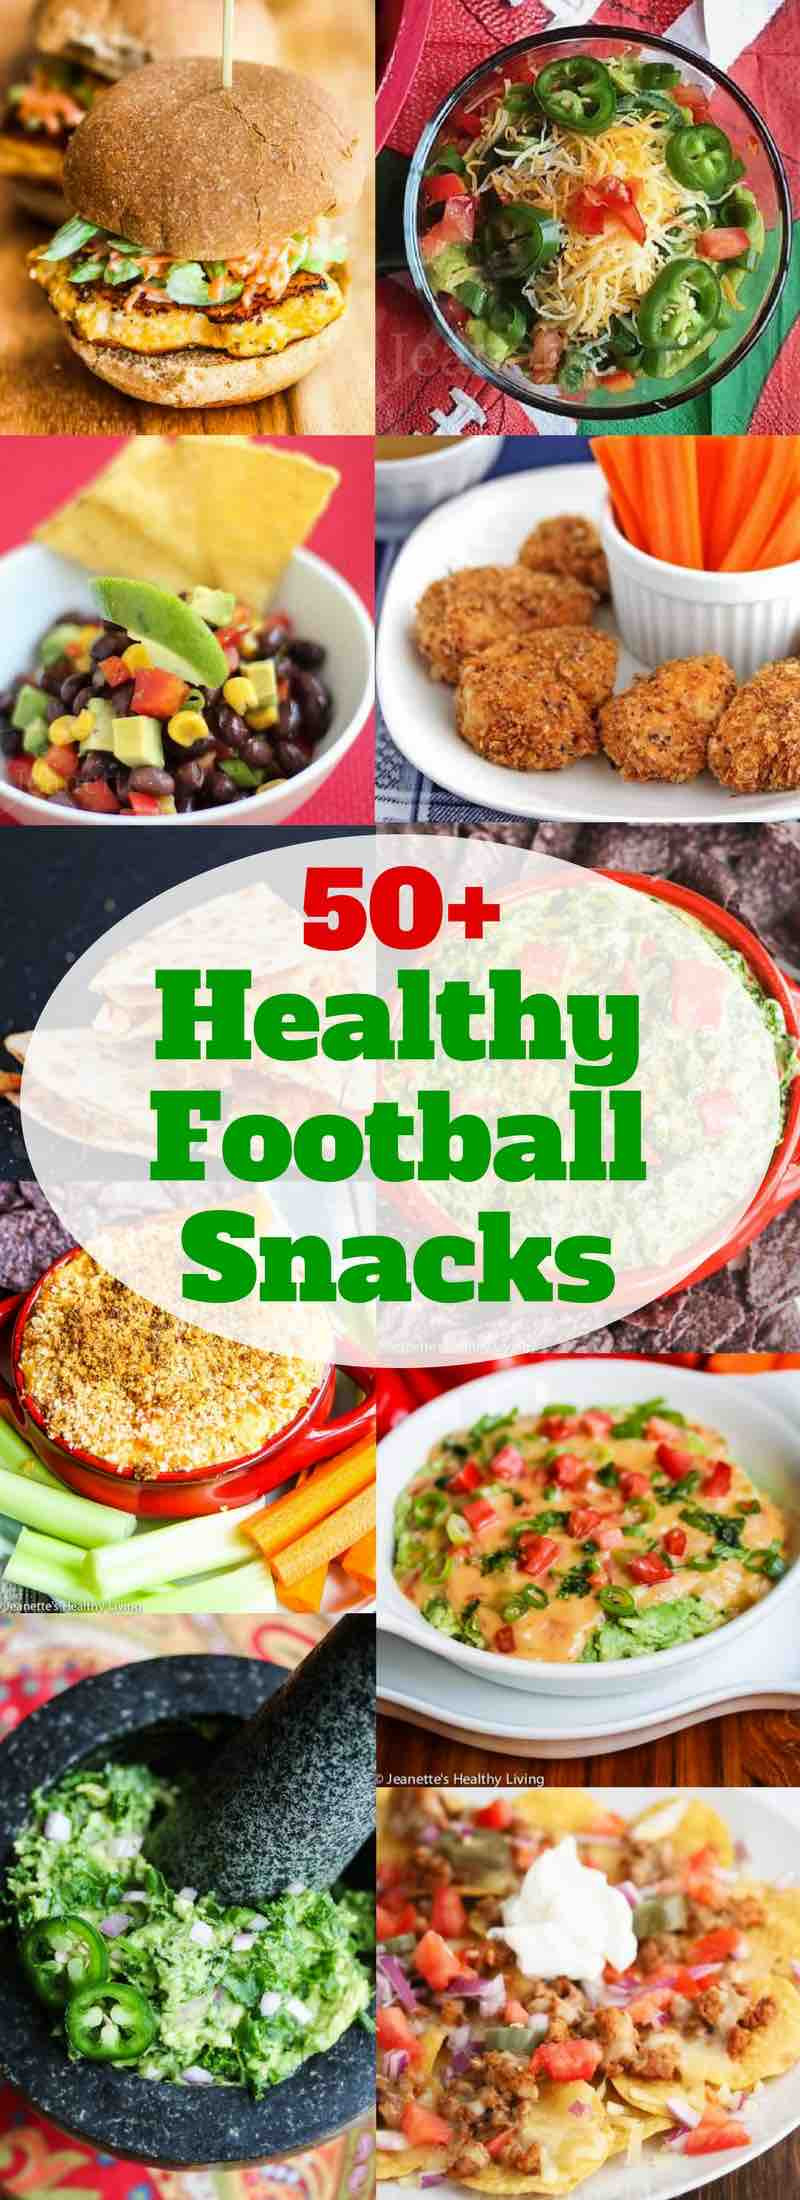 Healthy Snacks For Football Players
 50 Healthy Football Snacks Jeanette s Healthy Living